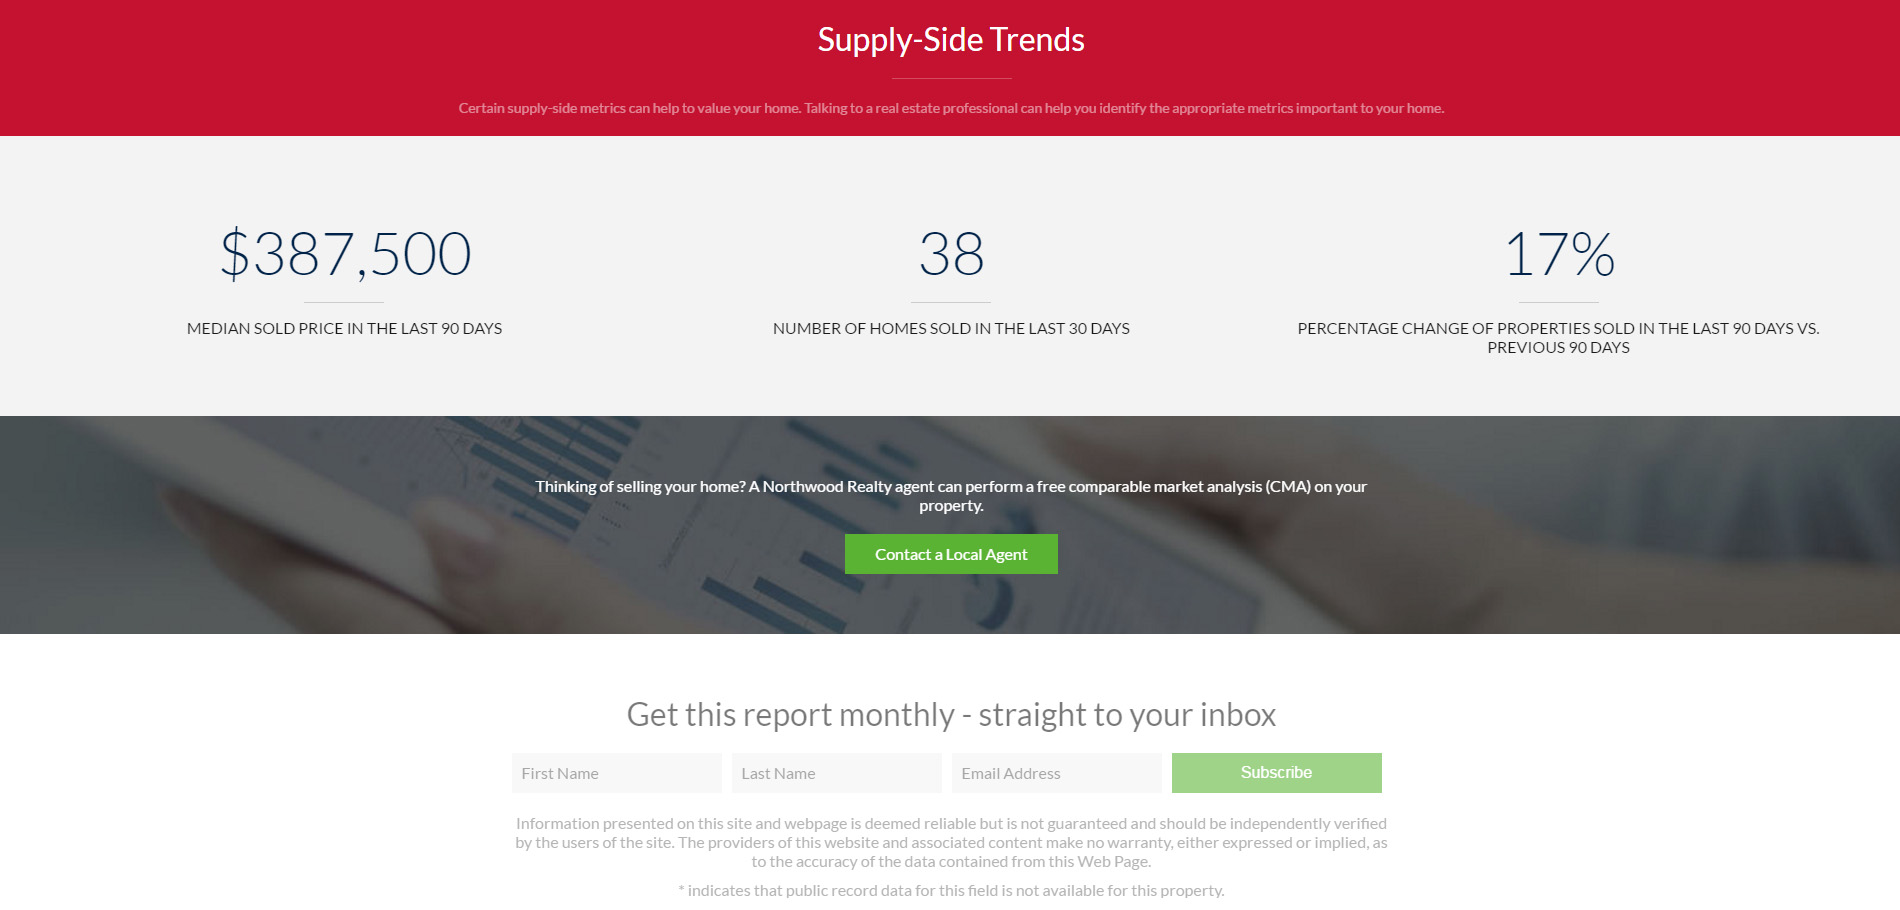 Northwood's Find Buyers program also provides supply side trends data.